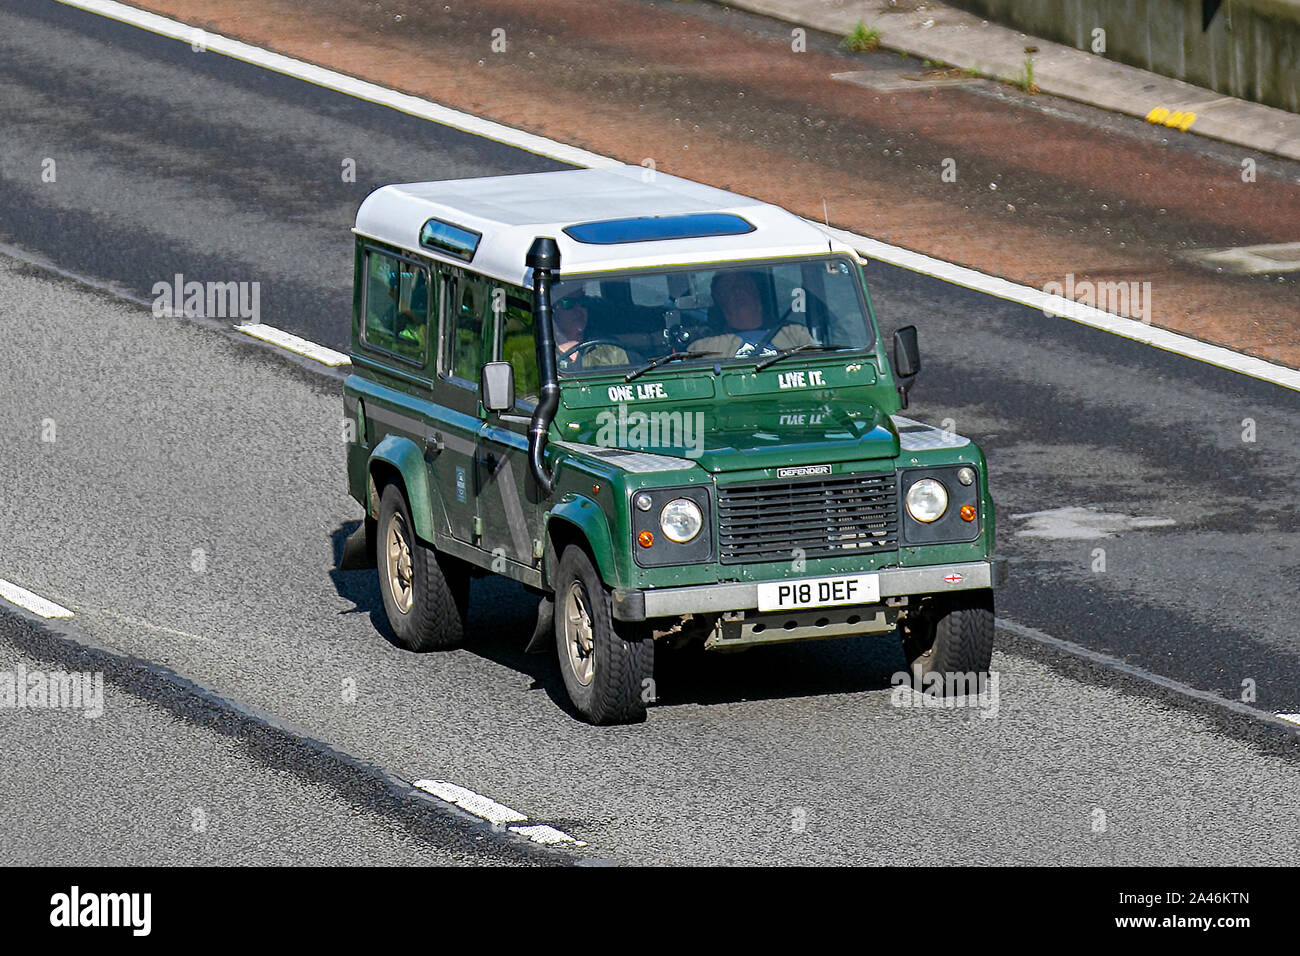 1997 90s nineties green Land Rover 110 Defender County Swtdi; with snorkel exhaust, UK Vehicular traffic, transport, modern, saloon cars, south-bound on the 3 lane M6 motorway highway. Stock Photo